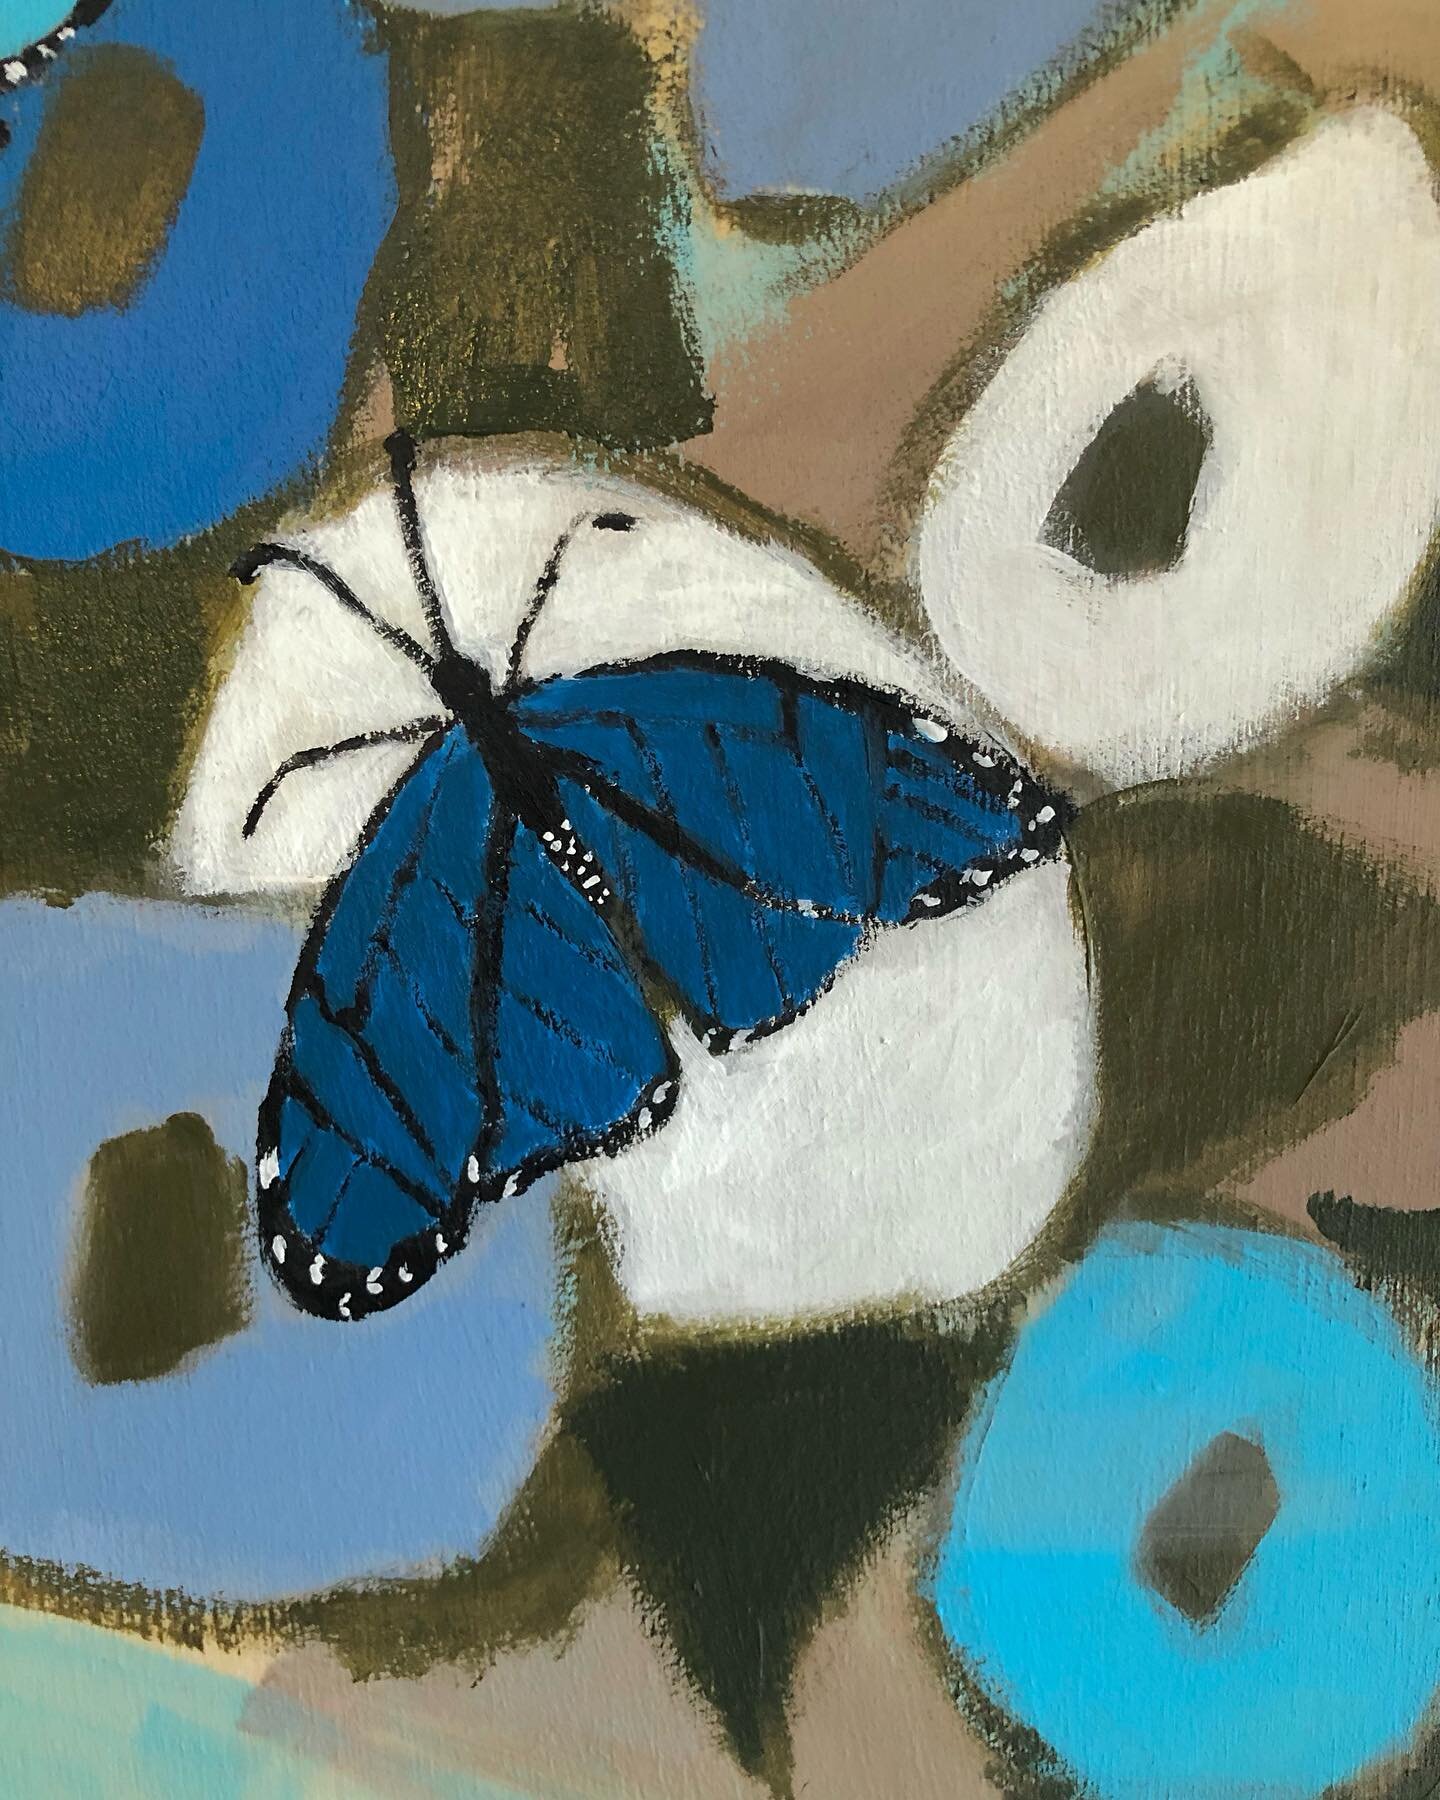 Little detail on this work in progress commission 🦋 This blue beauty is for an existing collector who is celebrating her 65th trip around the sun by hiking Mount St. Helens and gifting herself a custom piece of art!  First, what an incredible lady! 